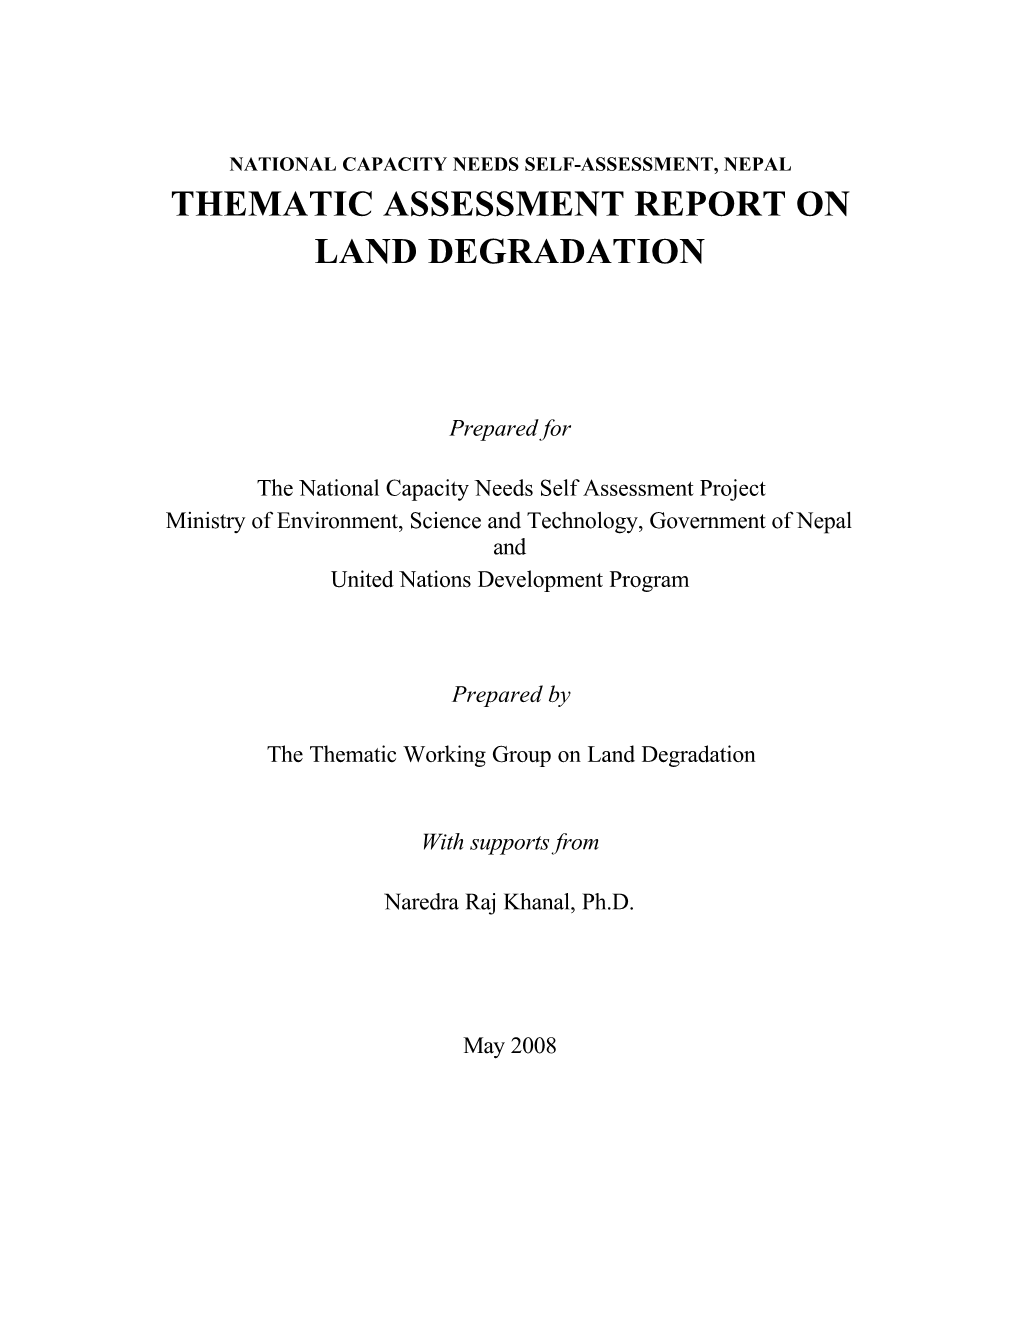 Thematic Assessment Report on Land Degradation